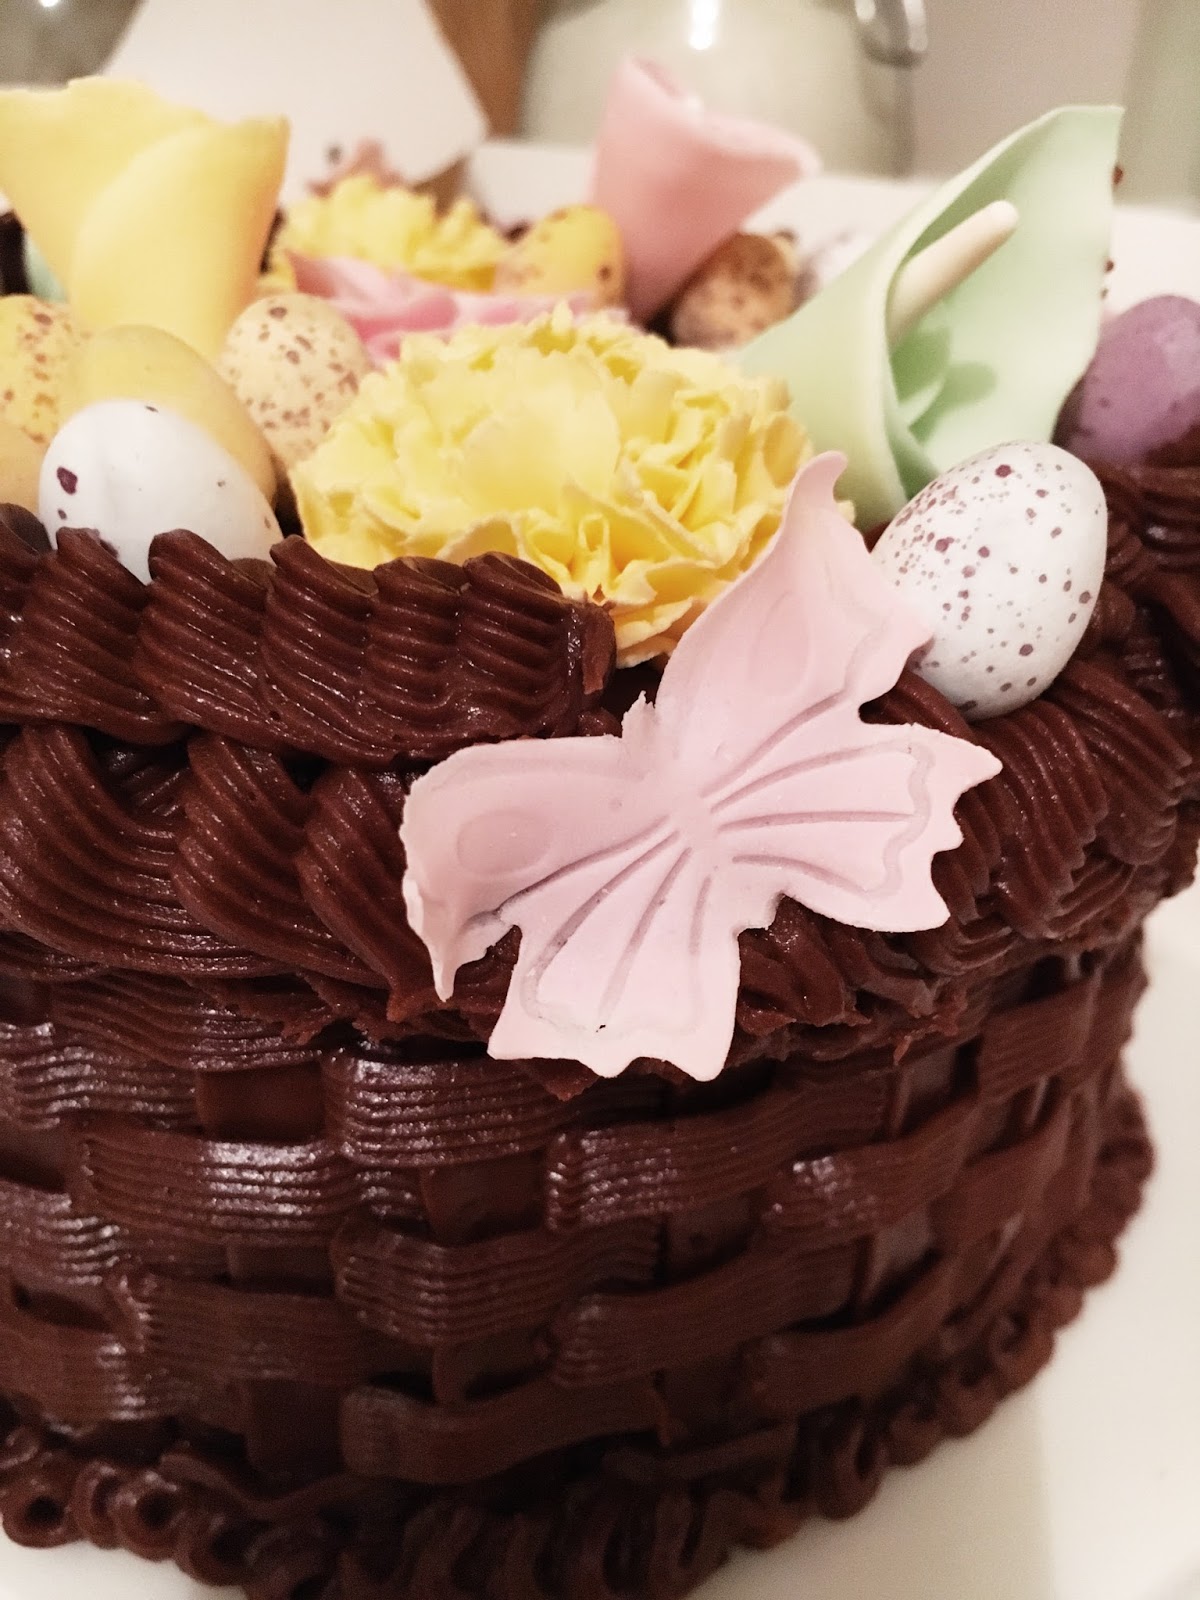 My Cake Decorating Course